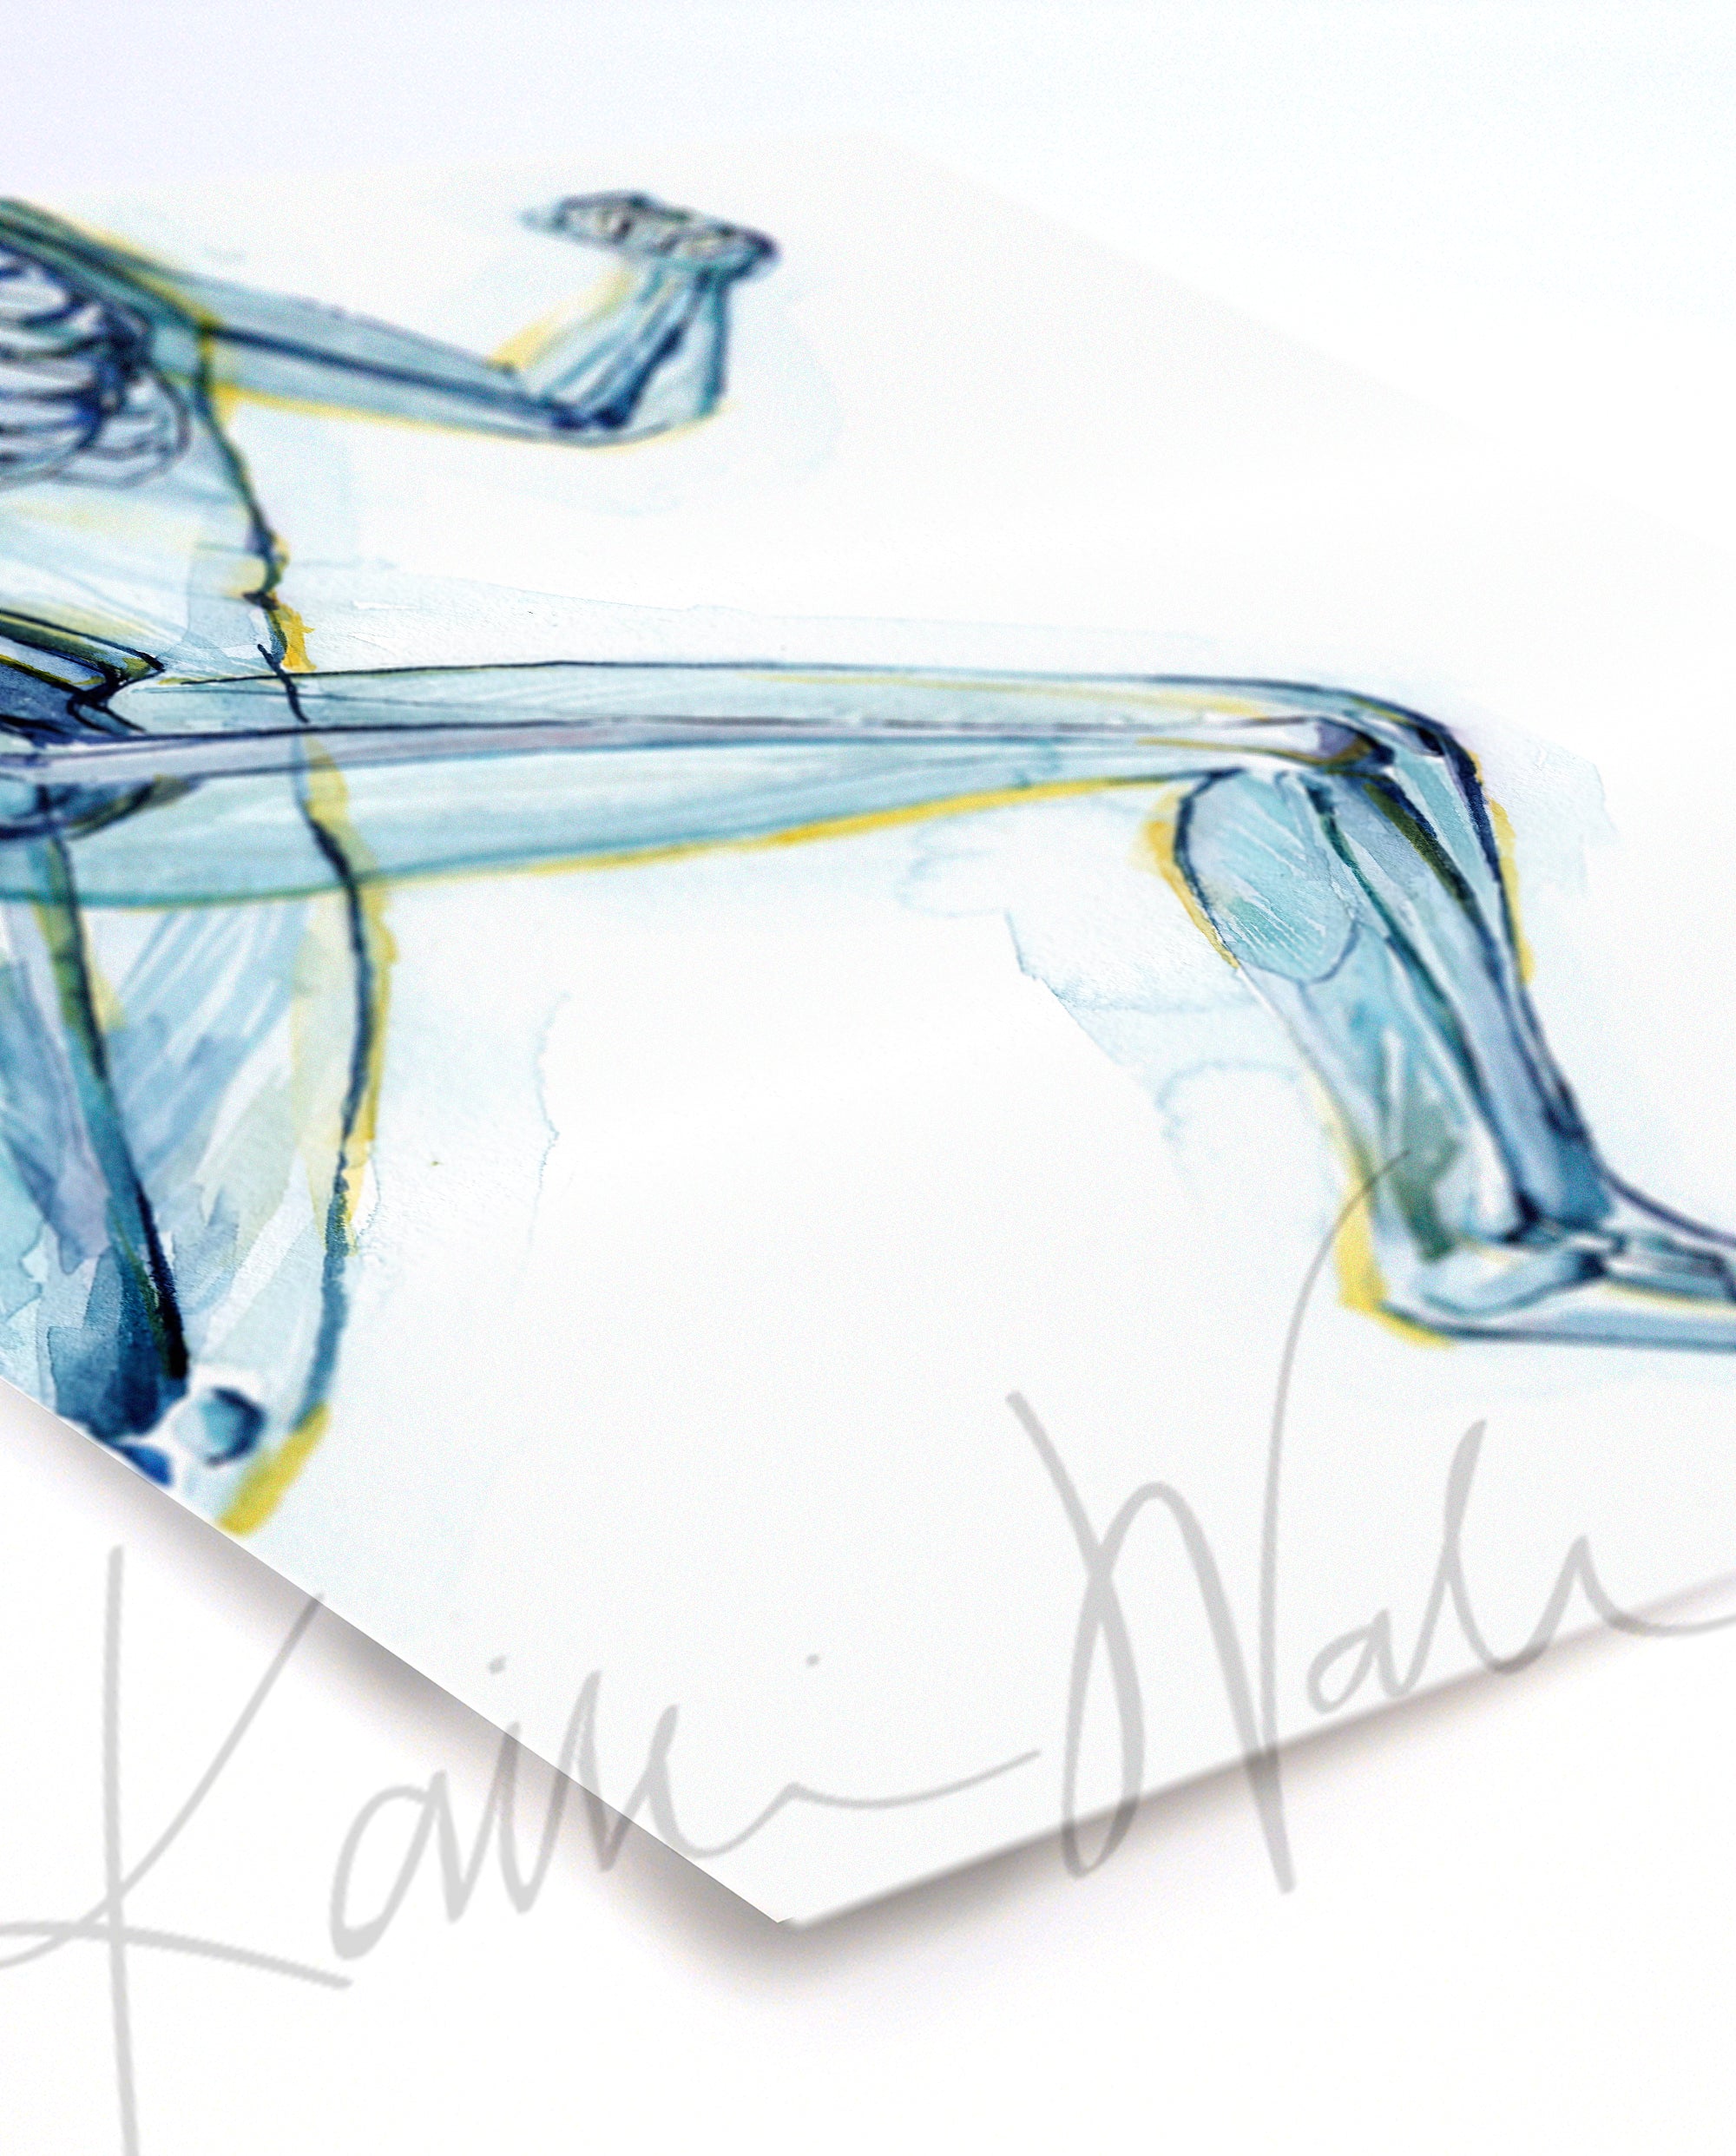 Unframed watercolor painting of a runner, showing the skeletal structure beneath. The painting is at an angle.